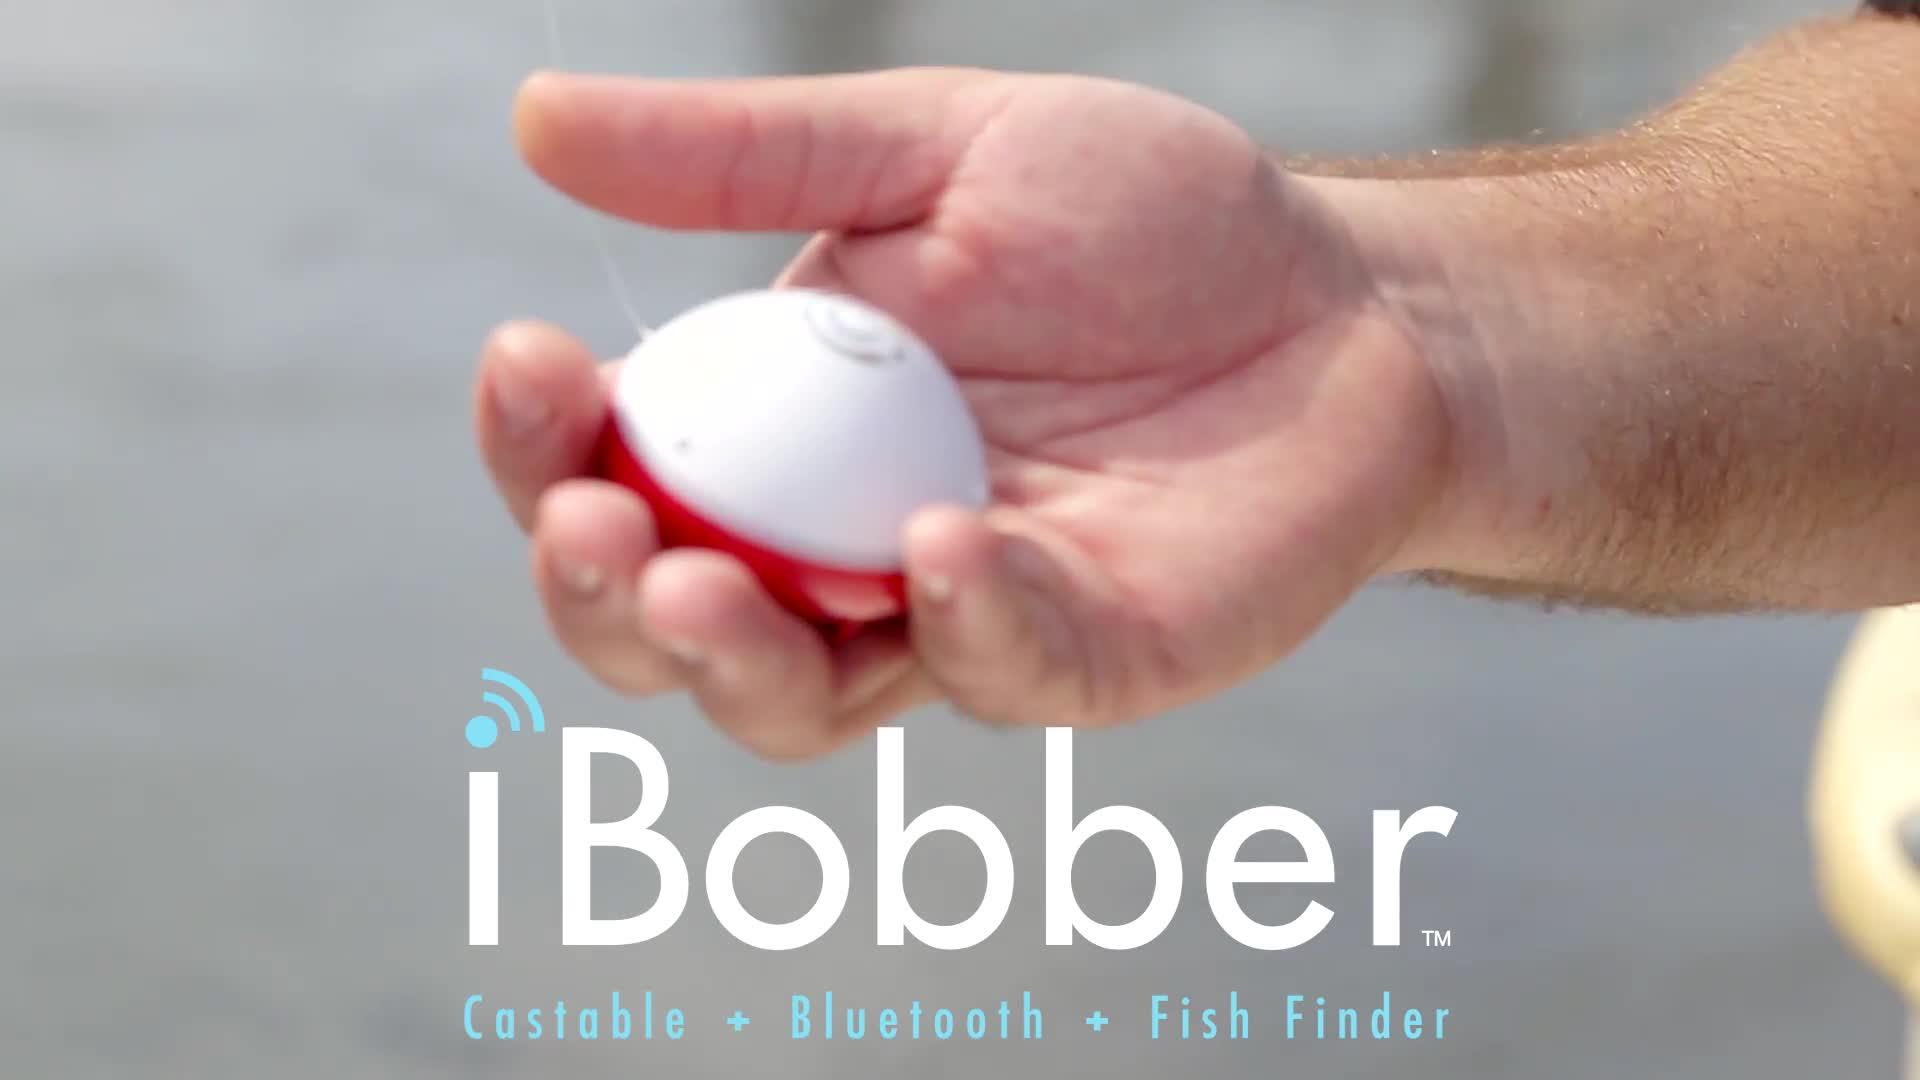 iBobber Castable Bluetooth Smart Fish Finder - Carp and Night Fishing